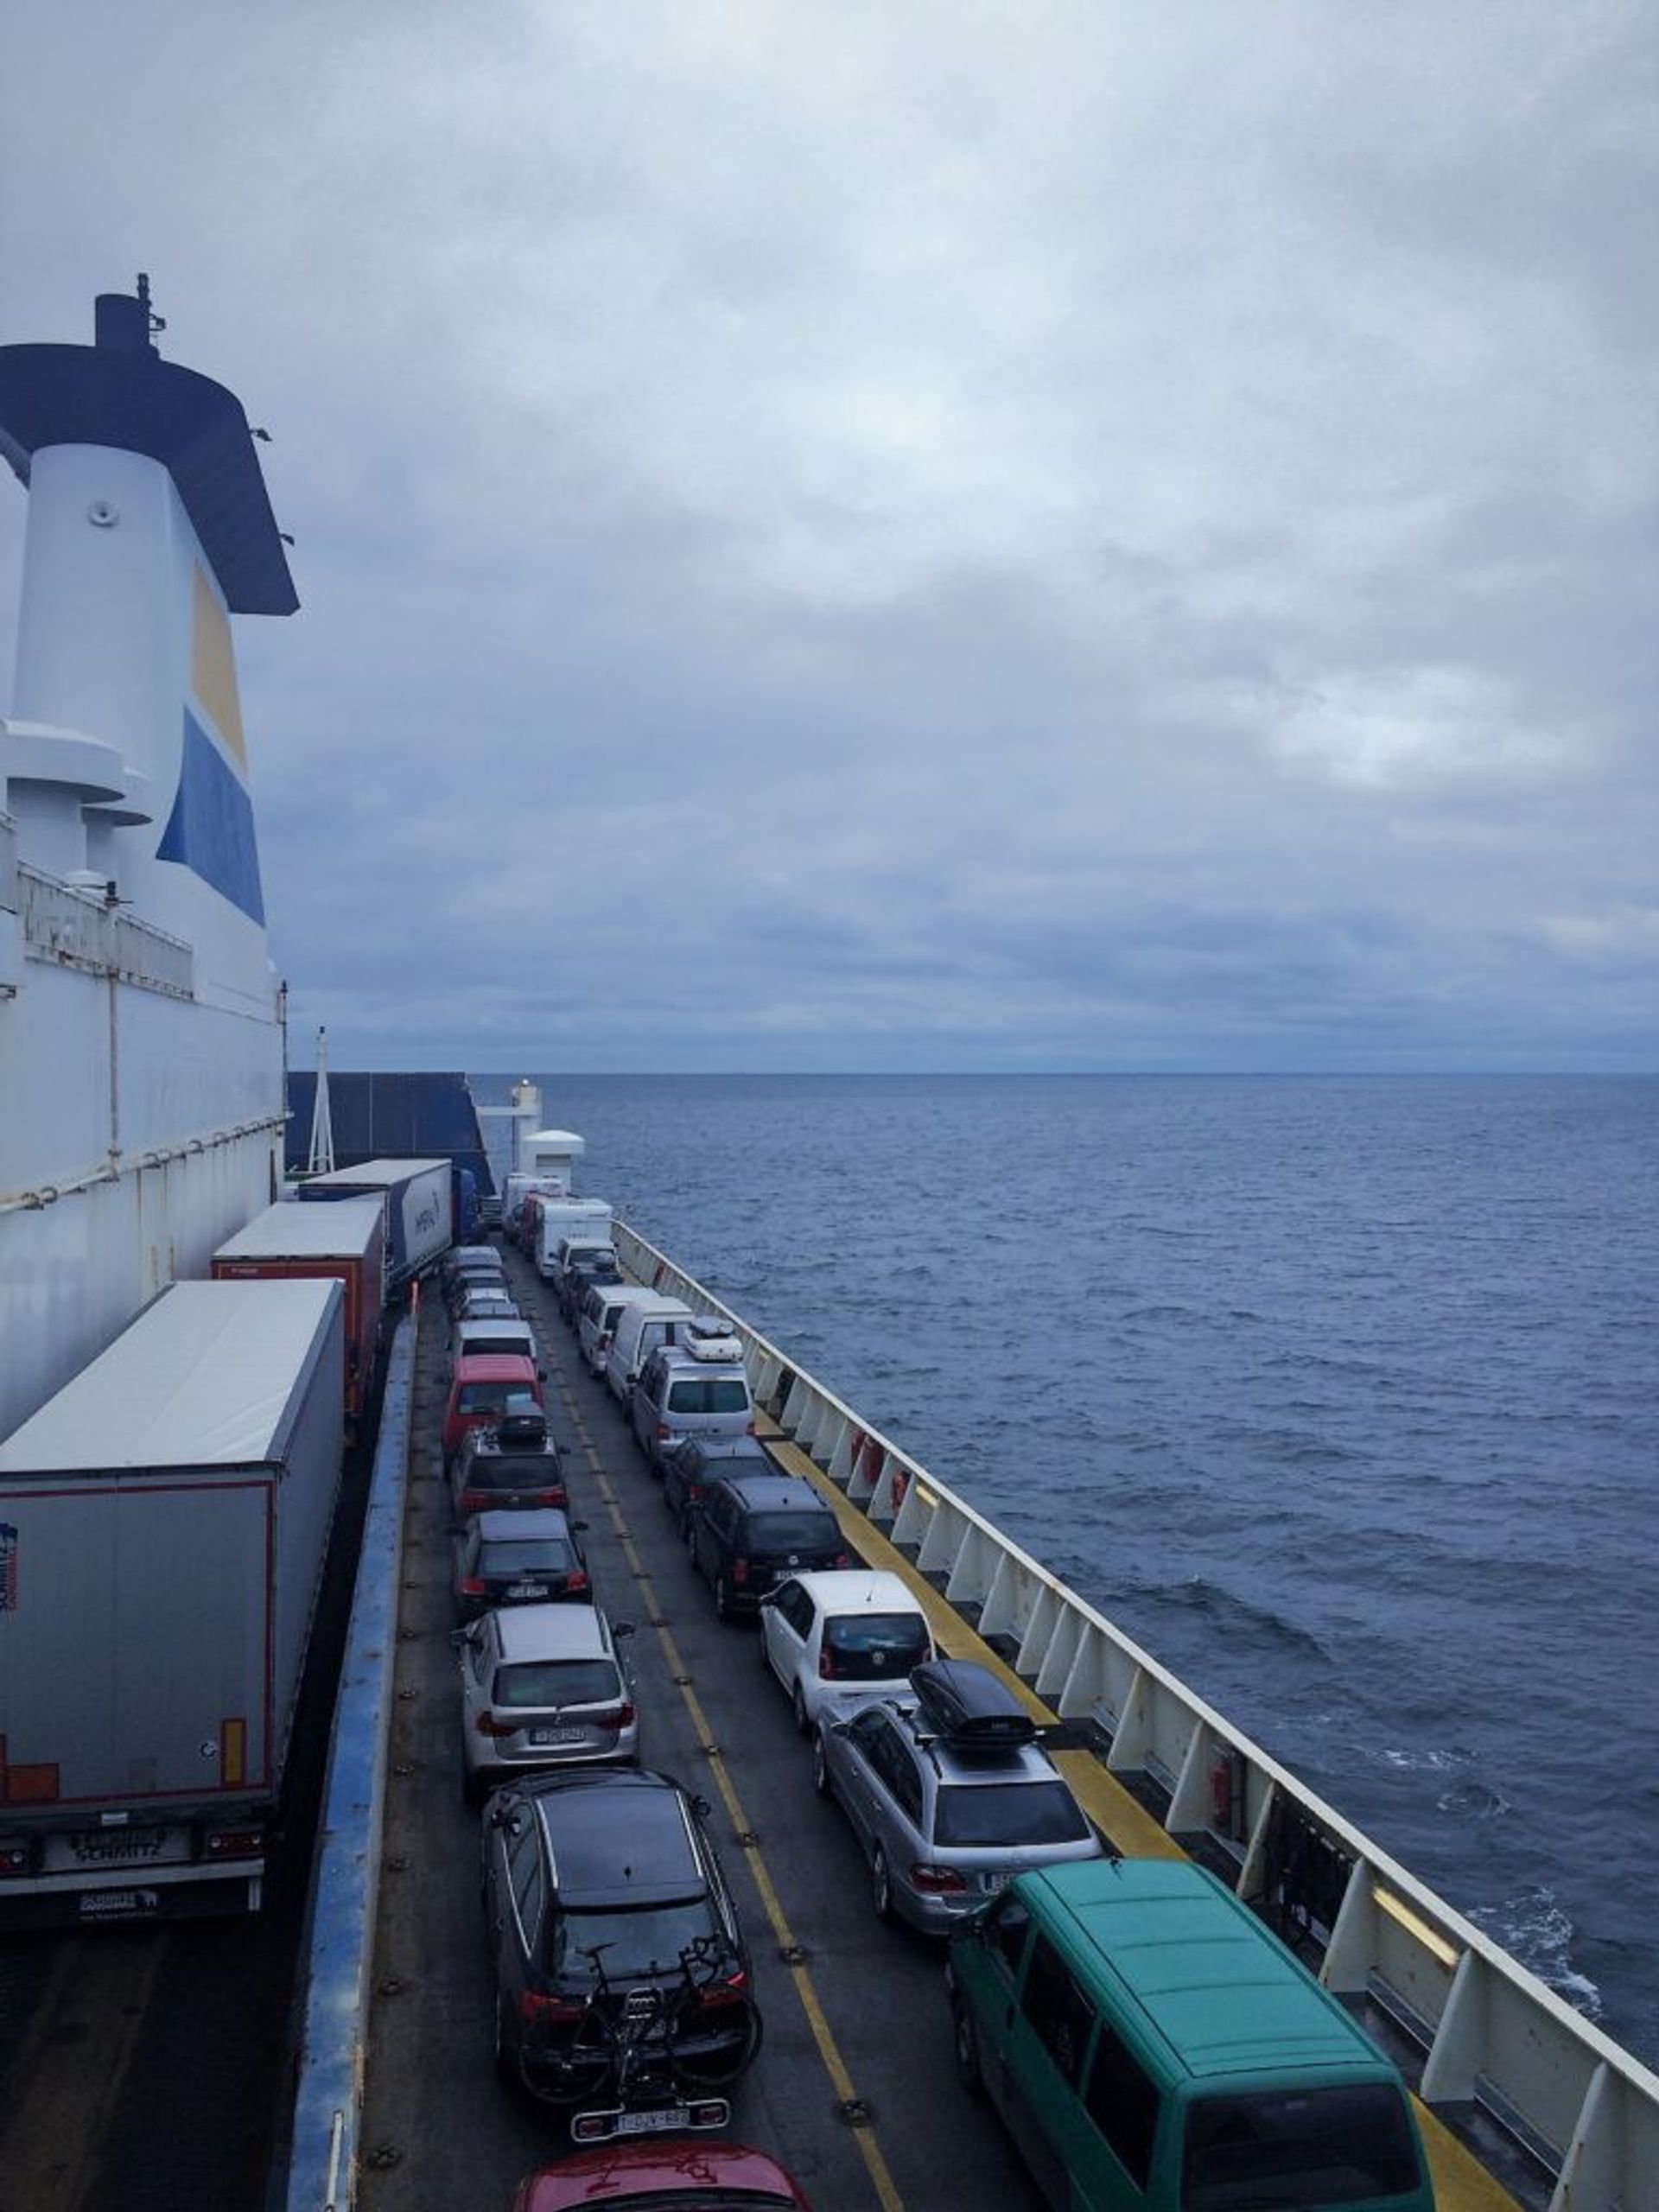 Lorries and cars on a ferry.